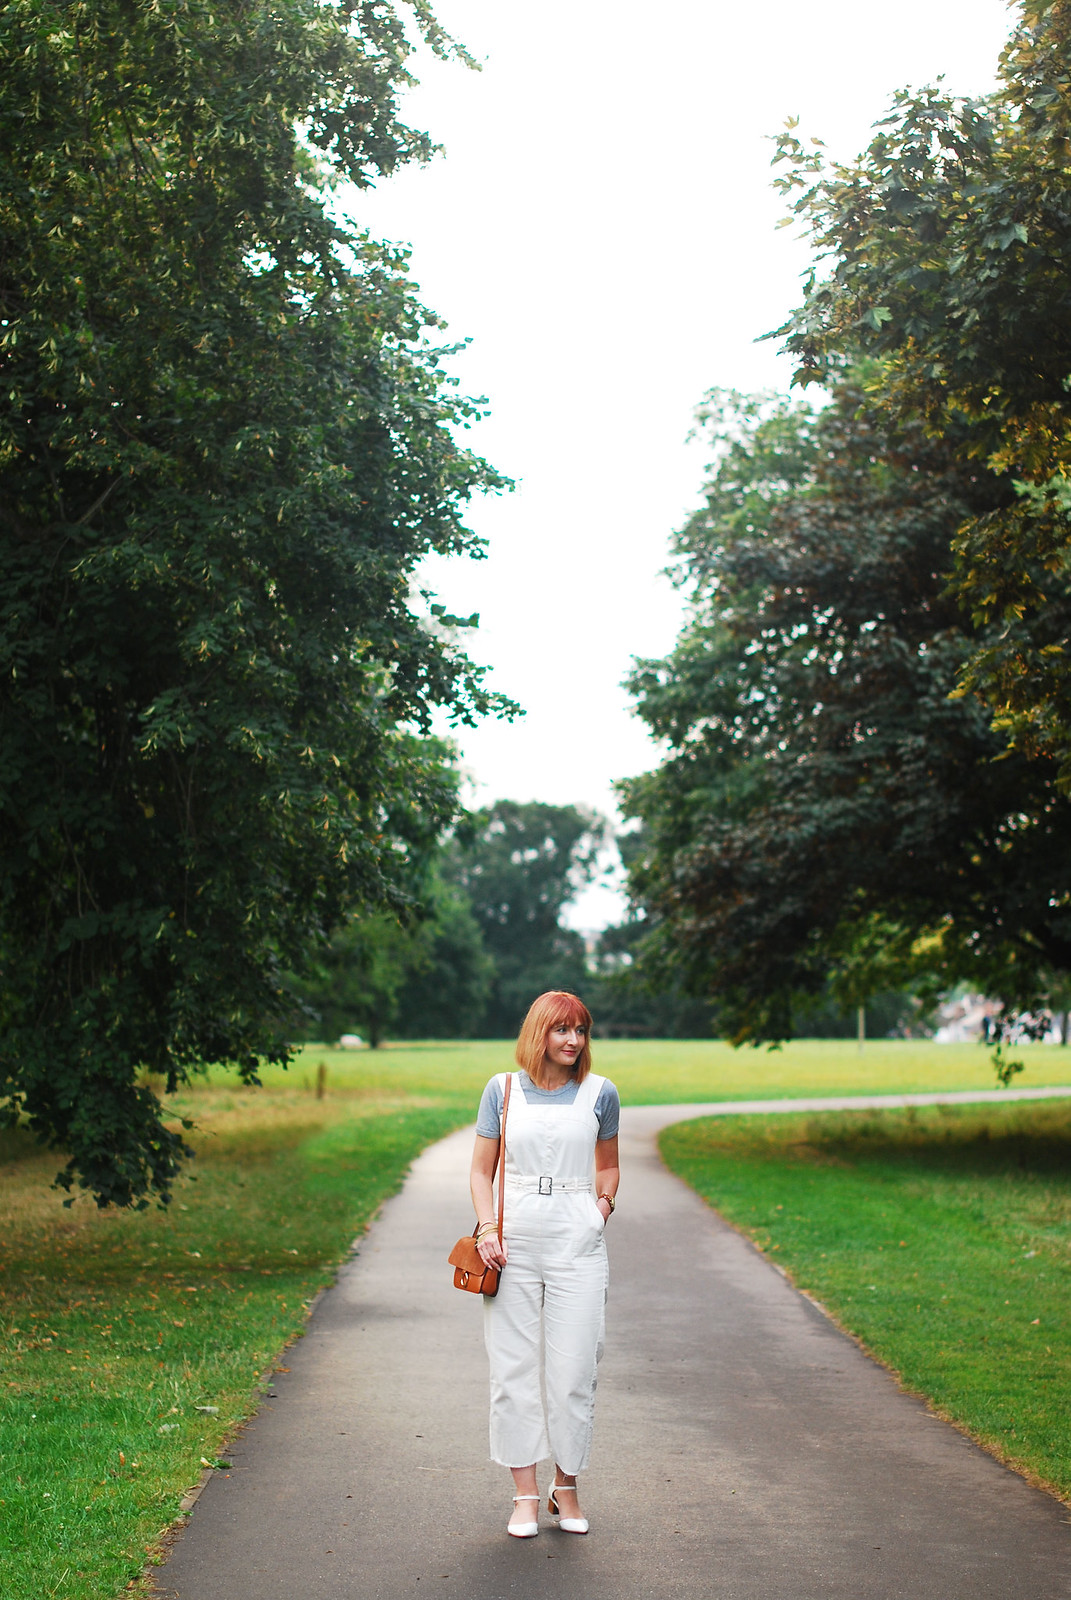 How to style white dungarees in the summer: Grey marl t-shirt, white shoes, tan crossbody bag (great for redheads) | Not Dressed As Lamb